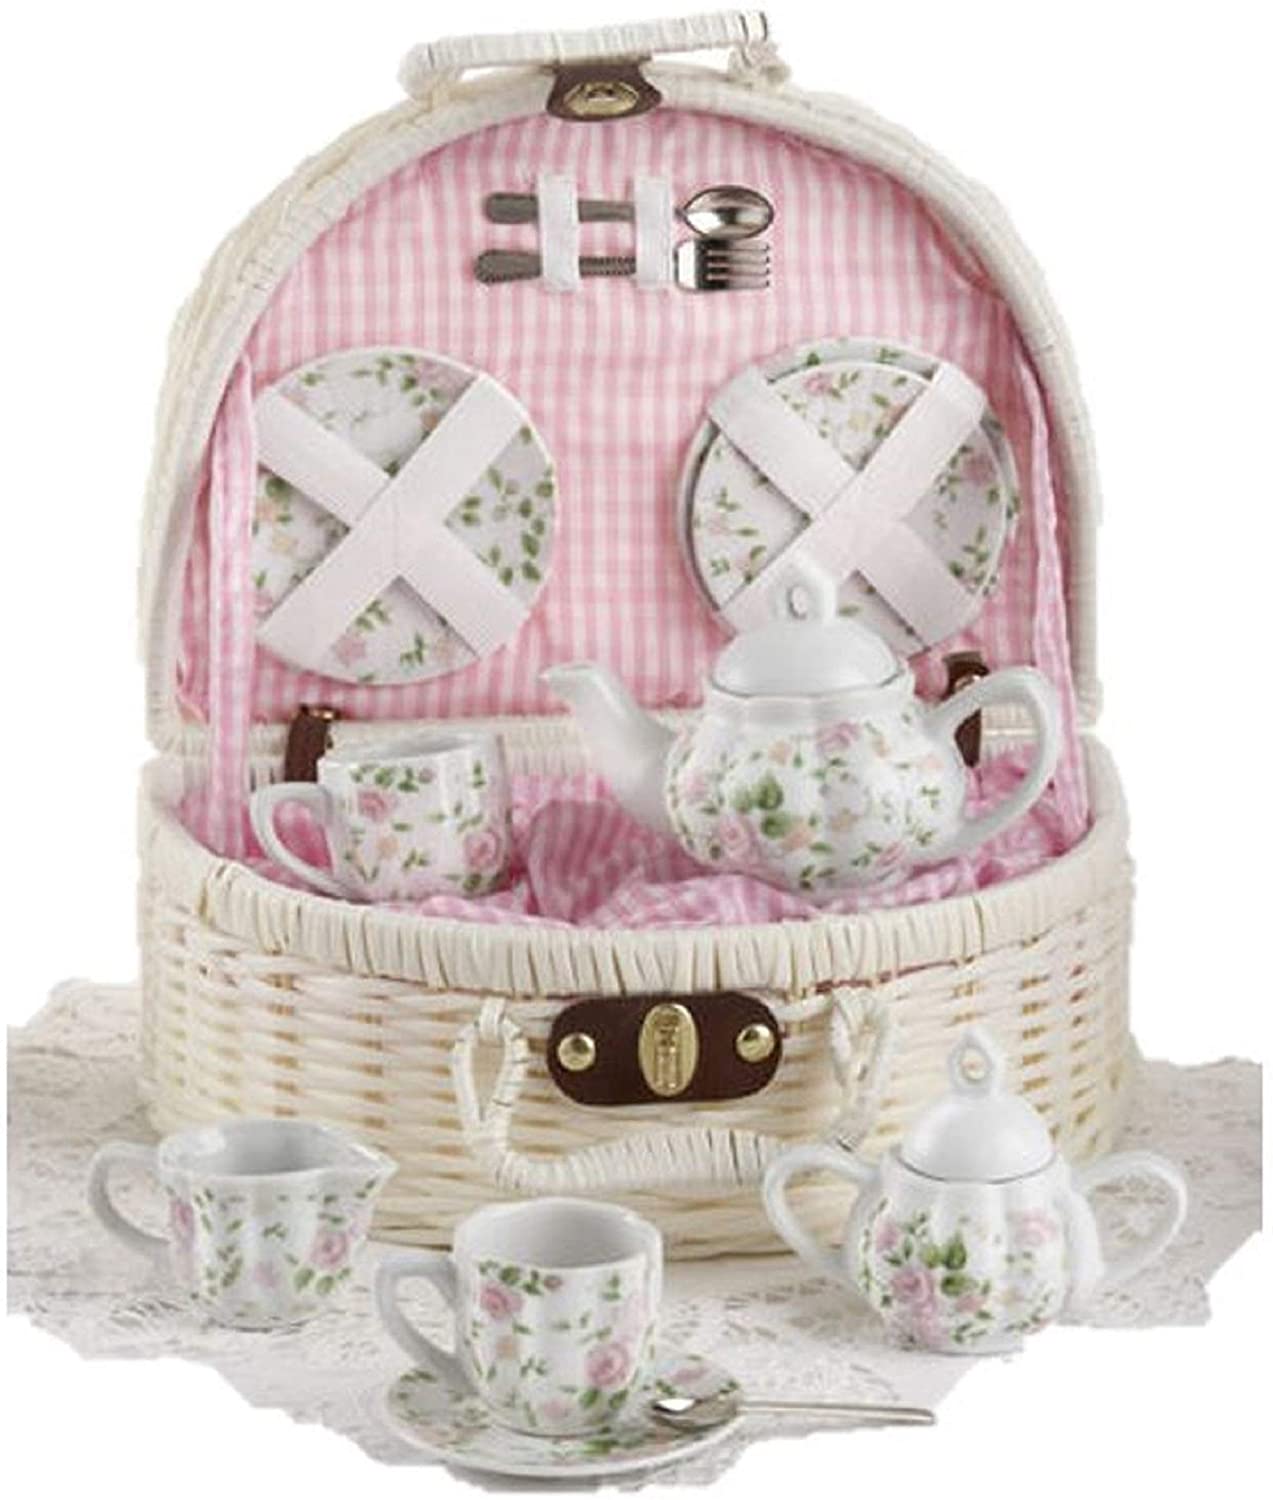 Delton Products Pink Chintz Children's Tea Set for Two